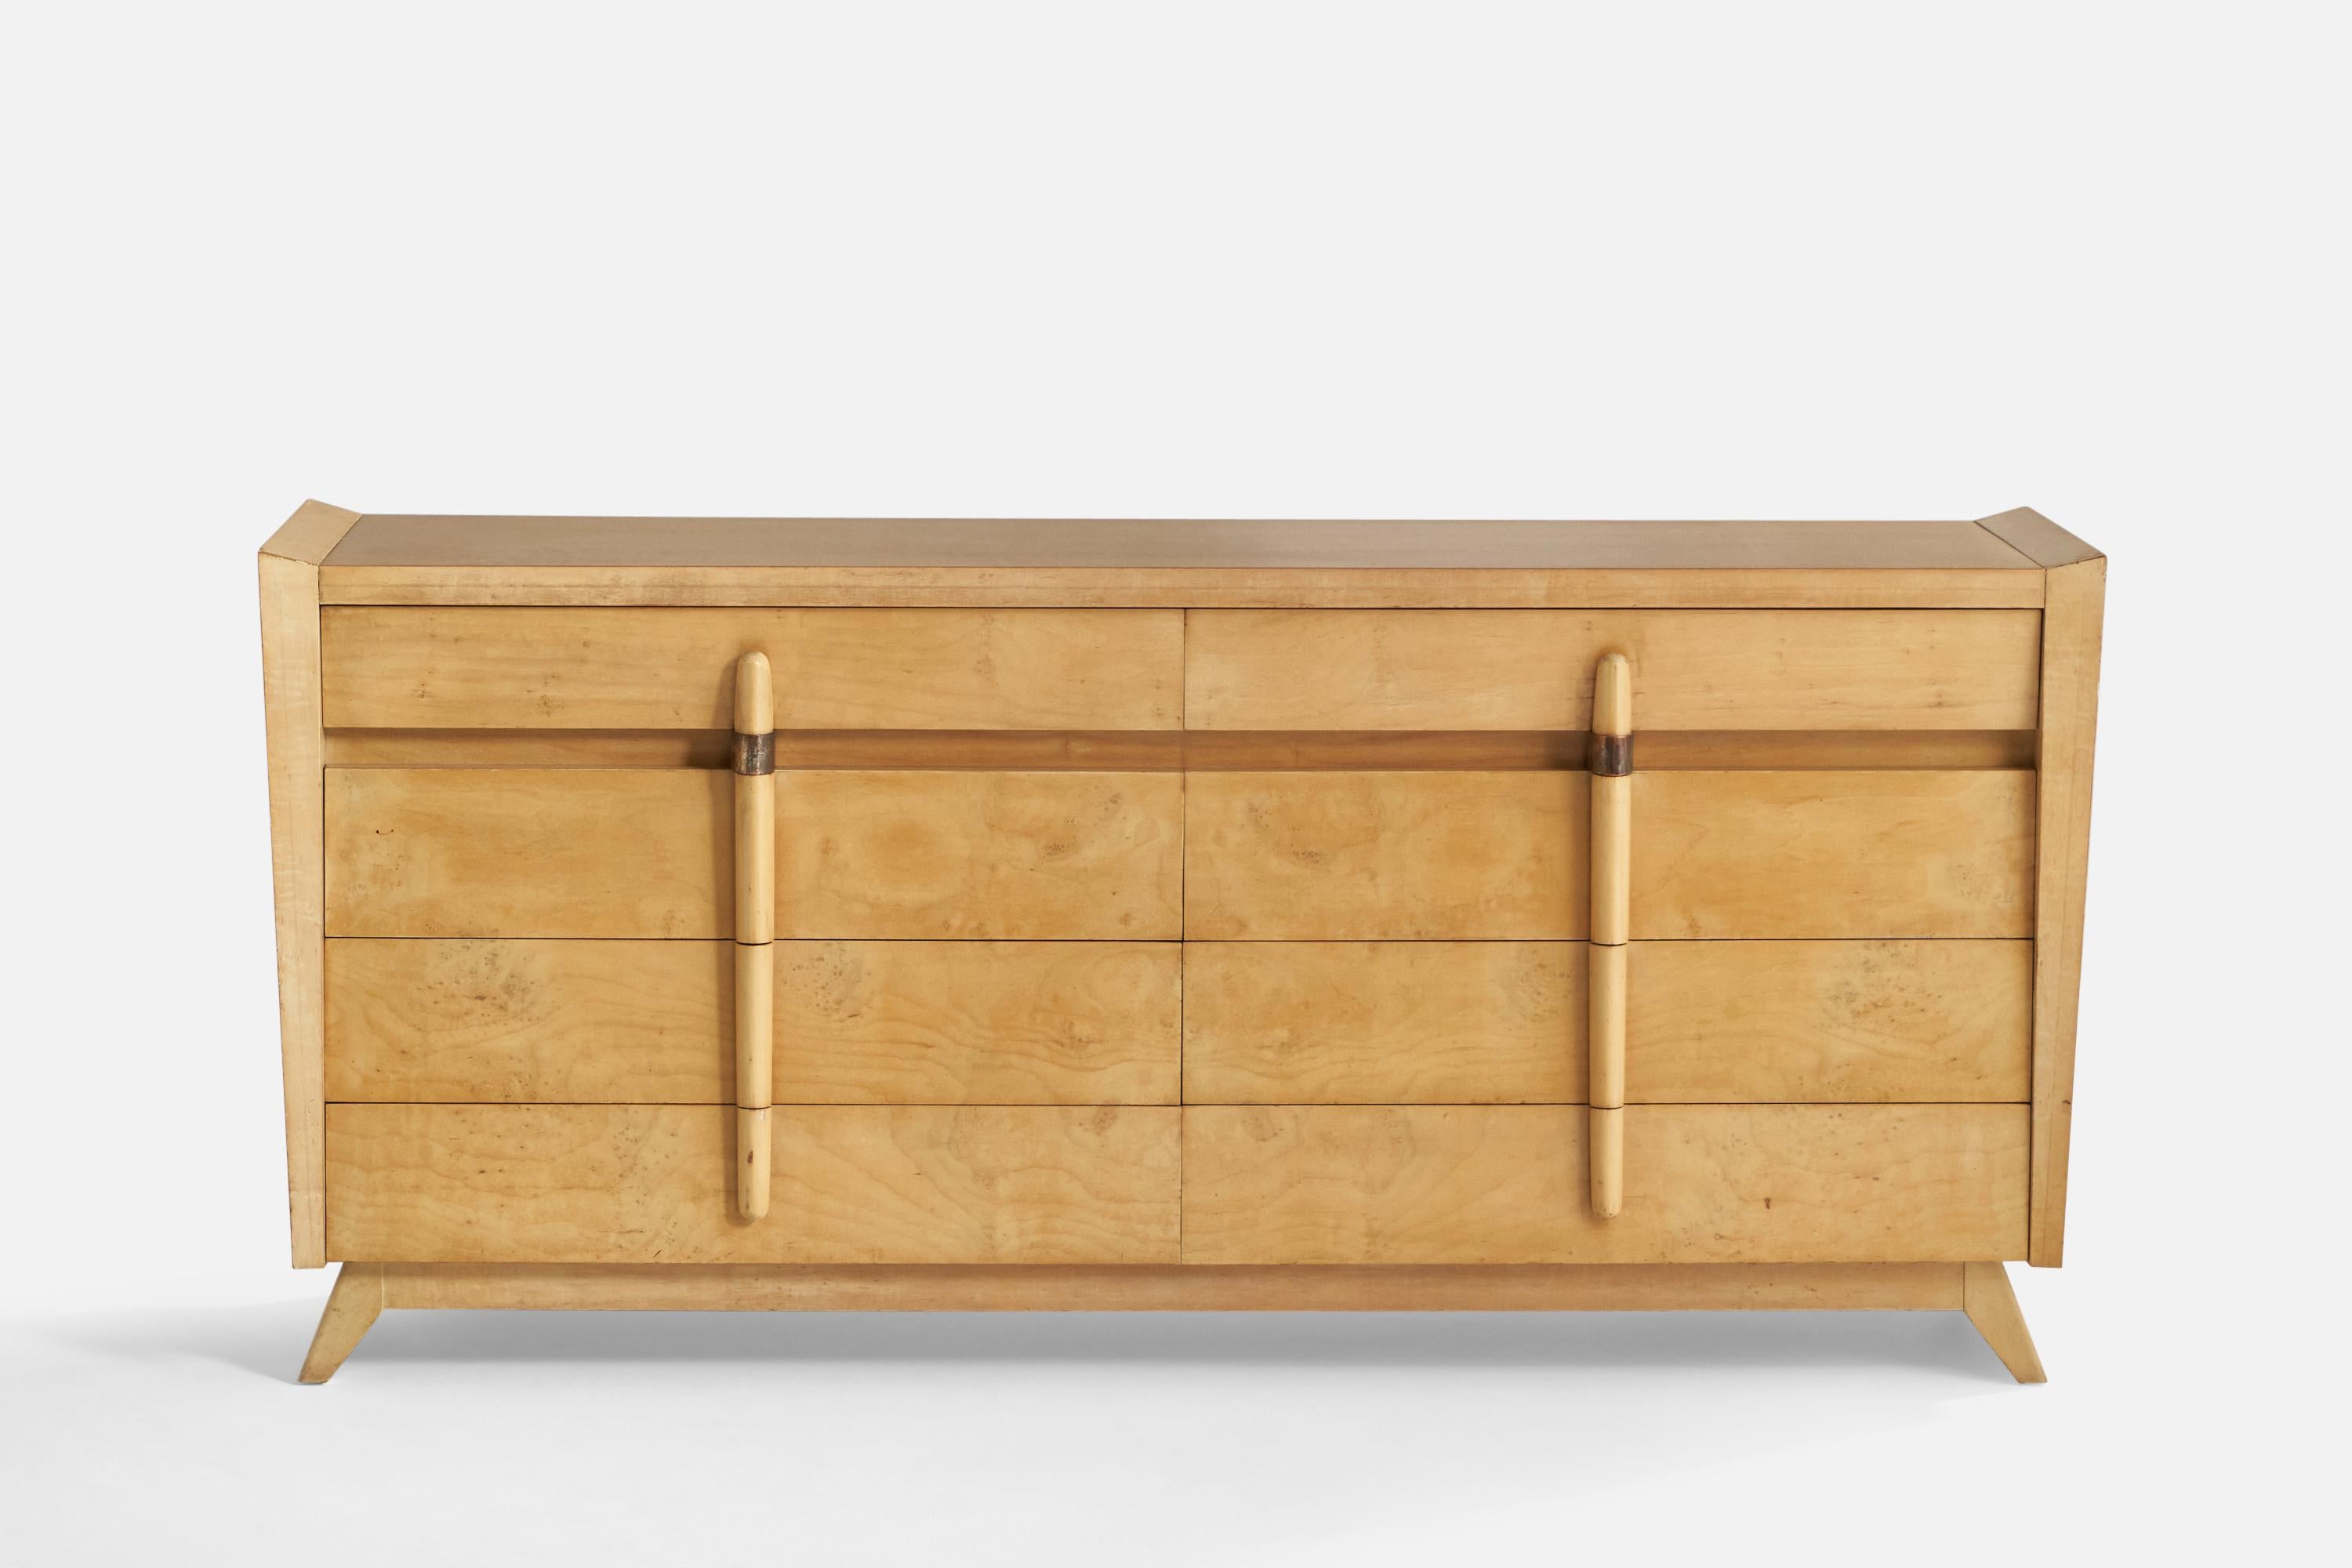 A maple and brass dresser designed and produced in the US, 1950s.